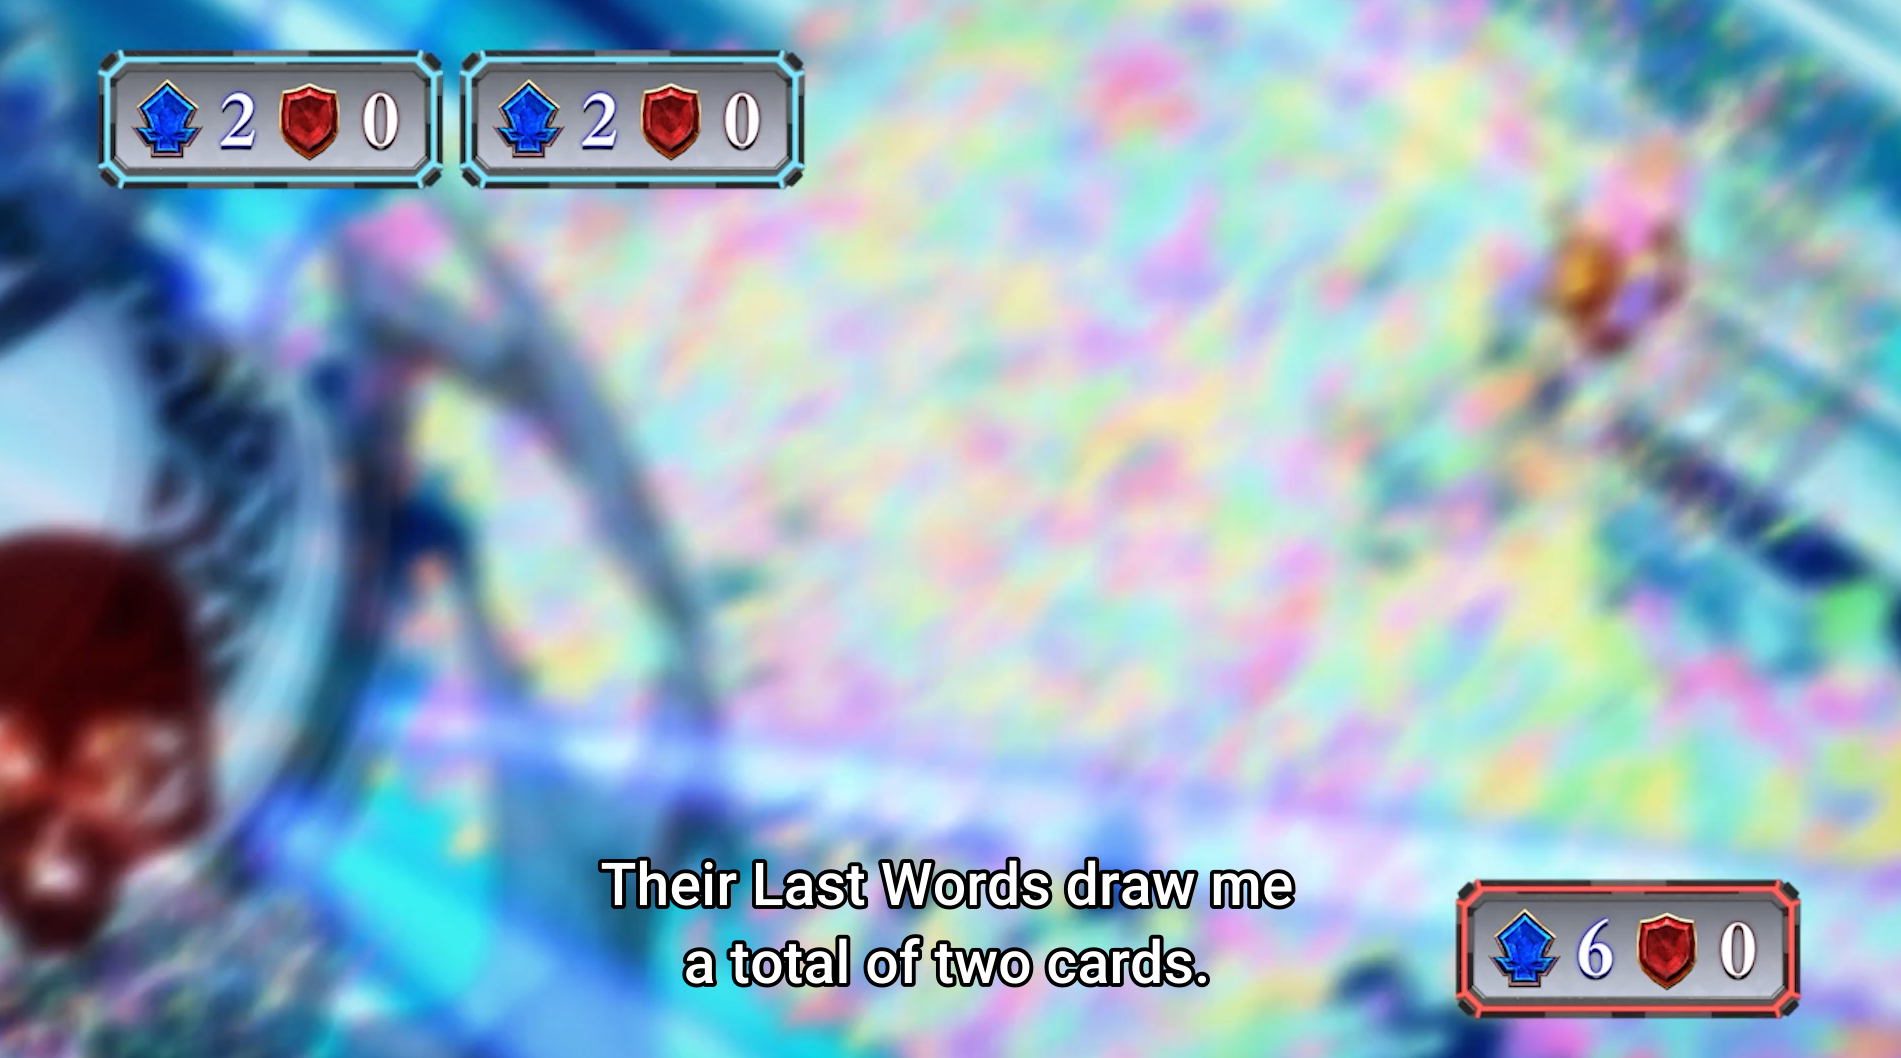 Screenshot of Shadowverse Flame episode 54. Two Analyzing Artifacts attack opponent followers and get destroyed themselves. Subtitle: "Their Last Words draw me (sic) a total of two cards."